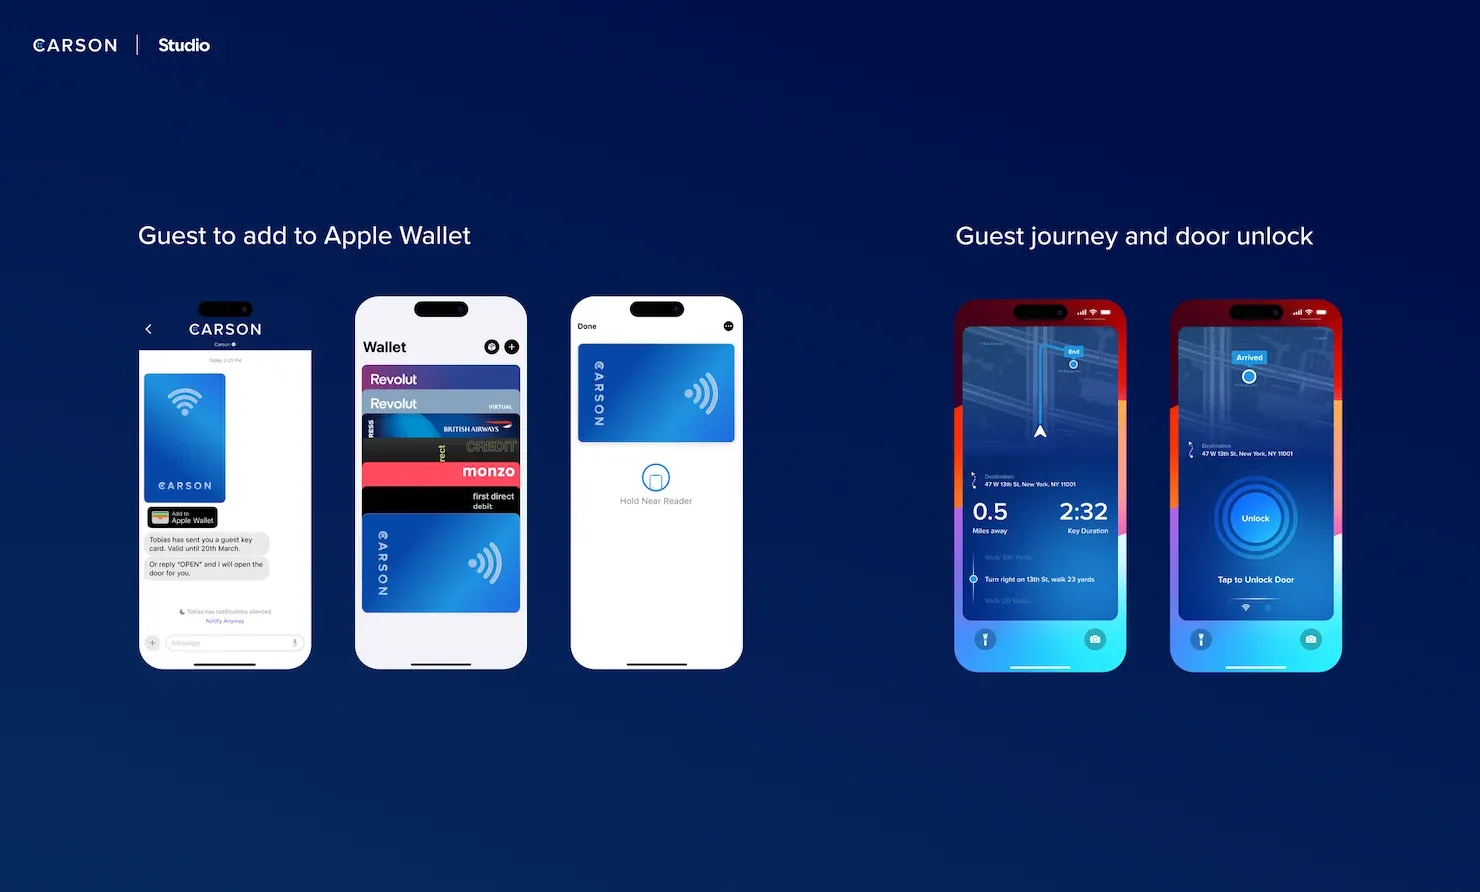 The screen shows the process of adding a guest key to Apple Wallet and the guest journey for door unlock. The first section illustrates the guest key card being sent via message and added to the Apple Wallet. The second section shows navigation to the destination and the door unlocking process.